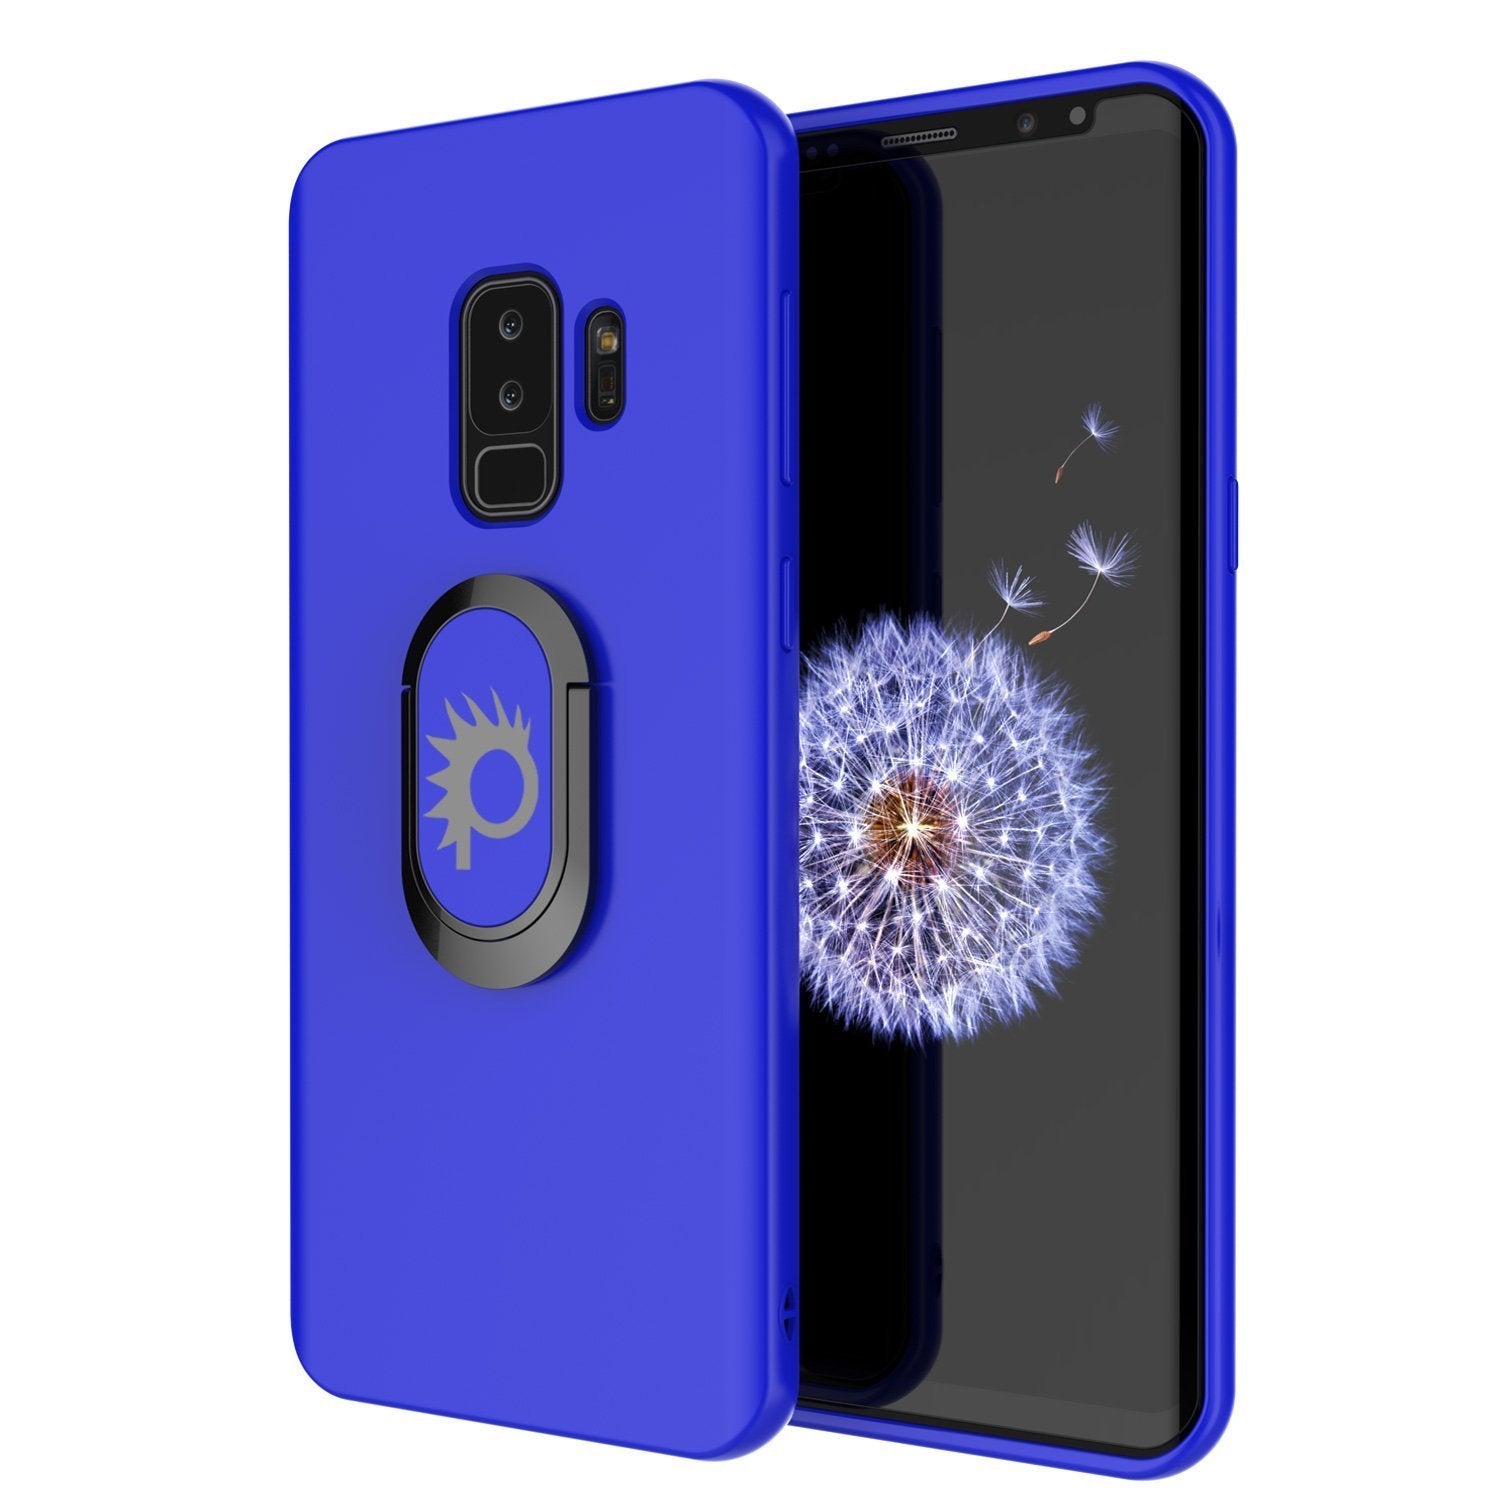 Galaxy S9 PLUS, Punkcase Magnetix Protective TPU Cover W/ Kickstand, Ring Grip Holder & Metal Plate for Magnetic Car Phone Mount PLUS PunkShield Screen Protector for Samsung S9+ Edge [Blue]